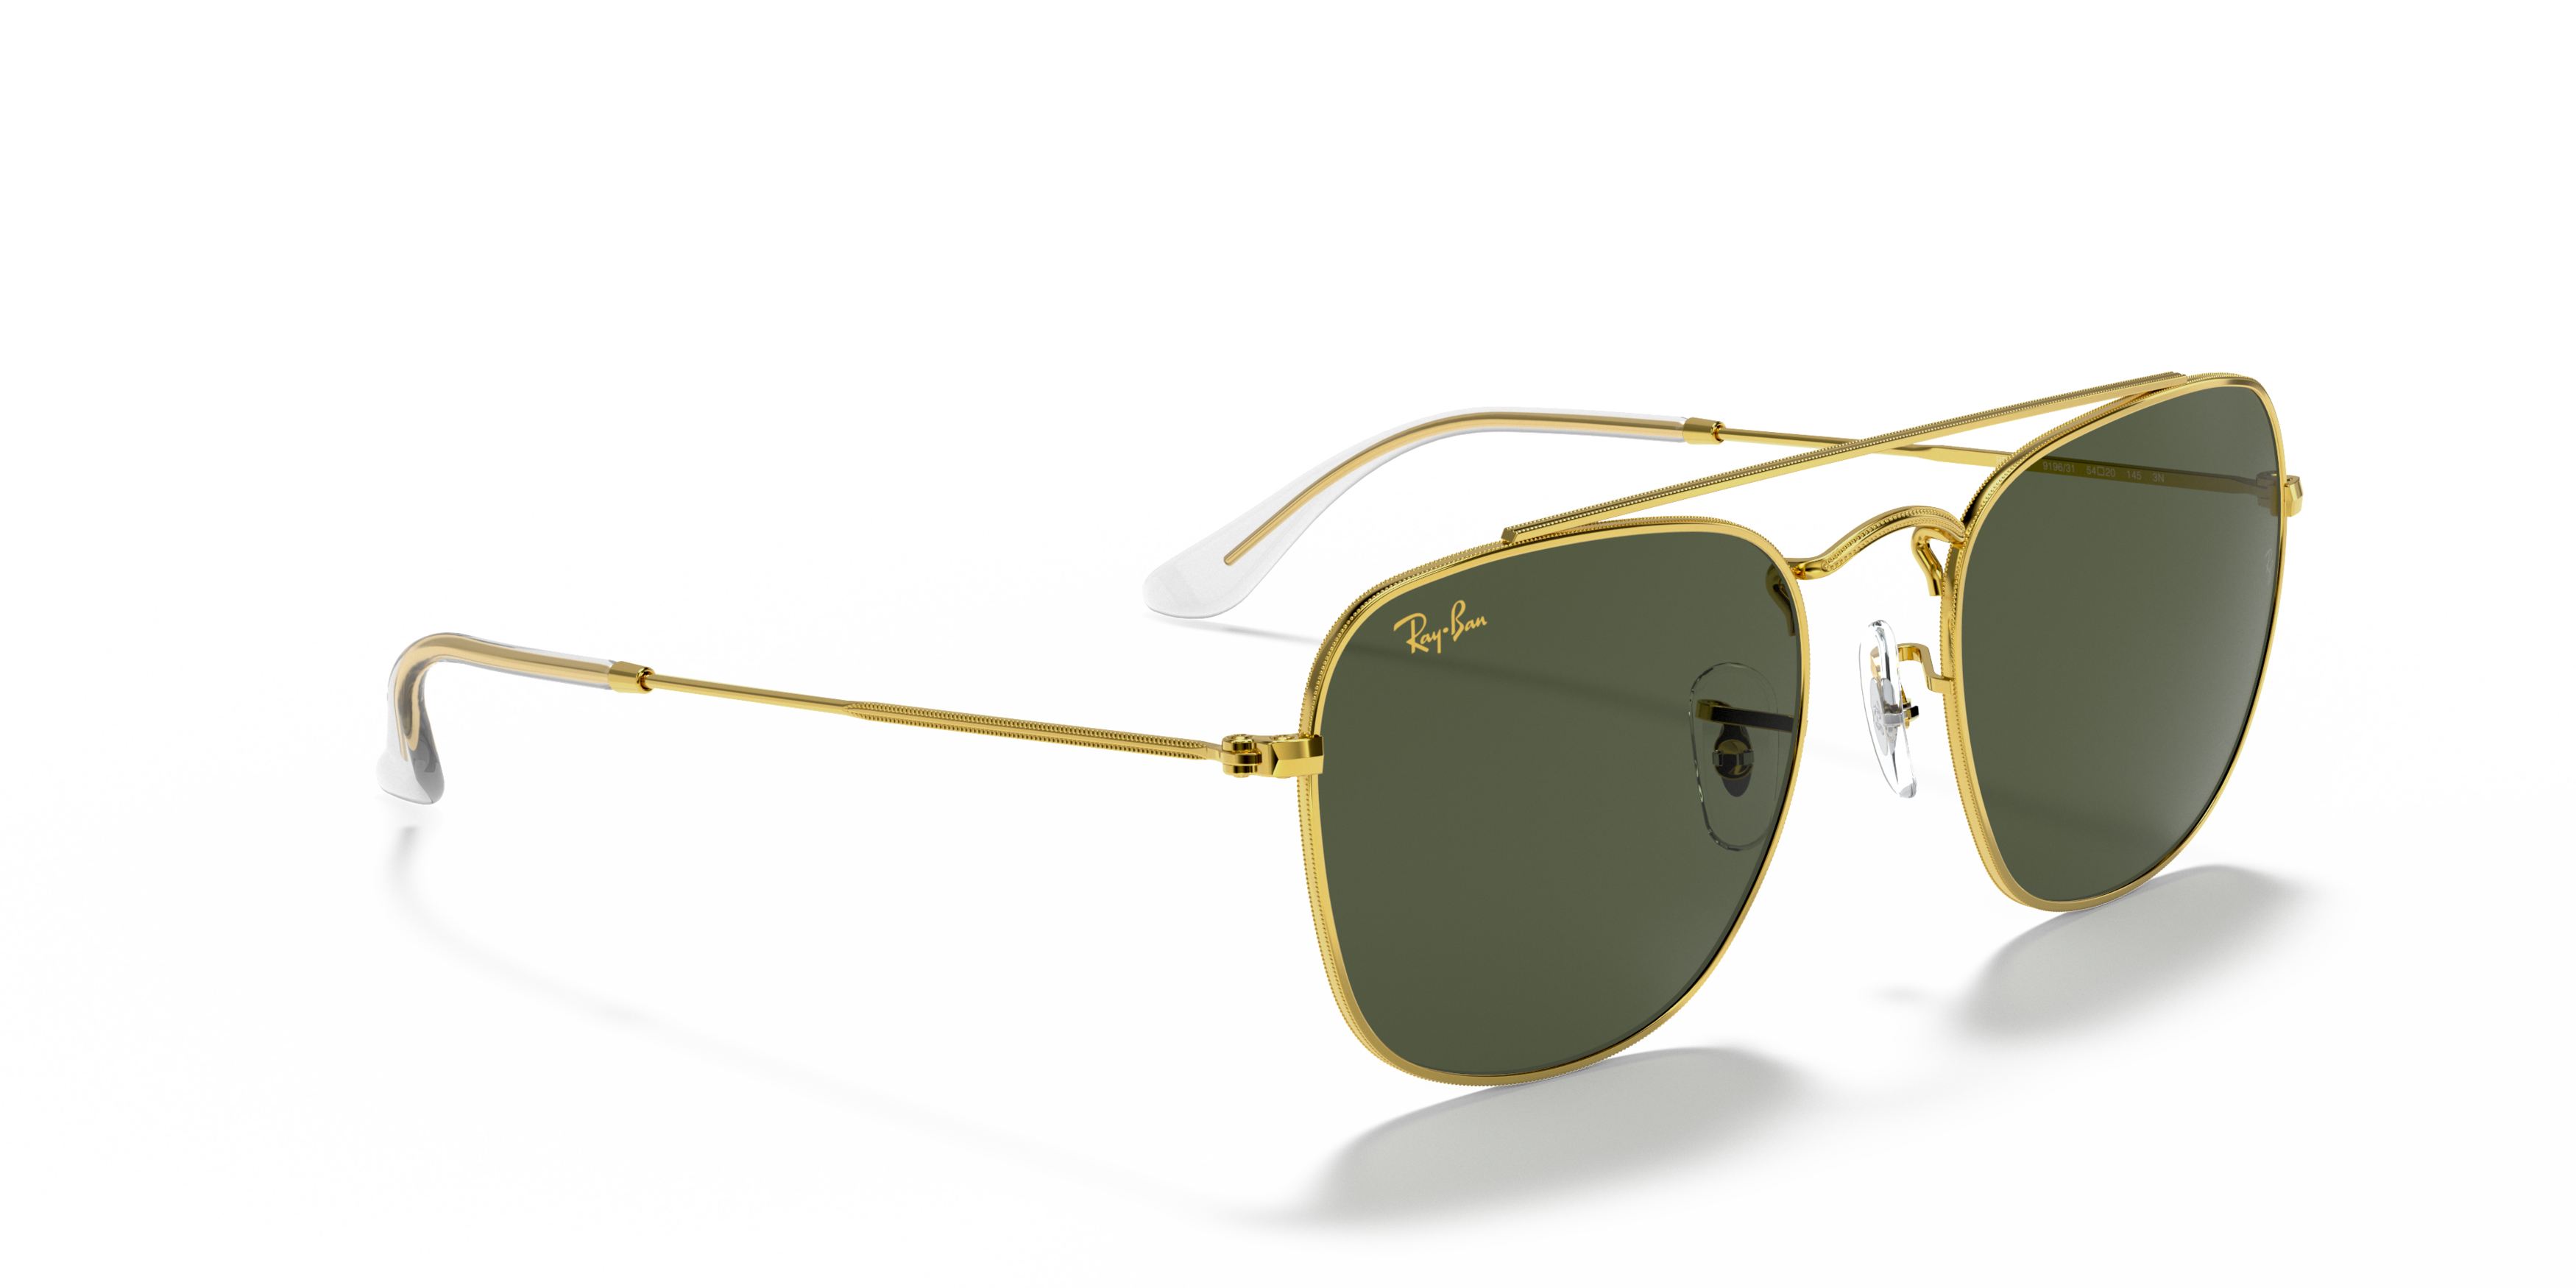 Angle_Right01 Ray-Ban Frank Legend Gold RB3557 919631 Groen / Goud